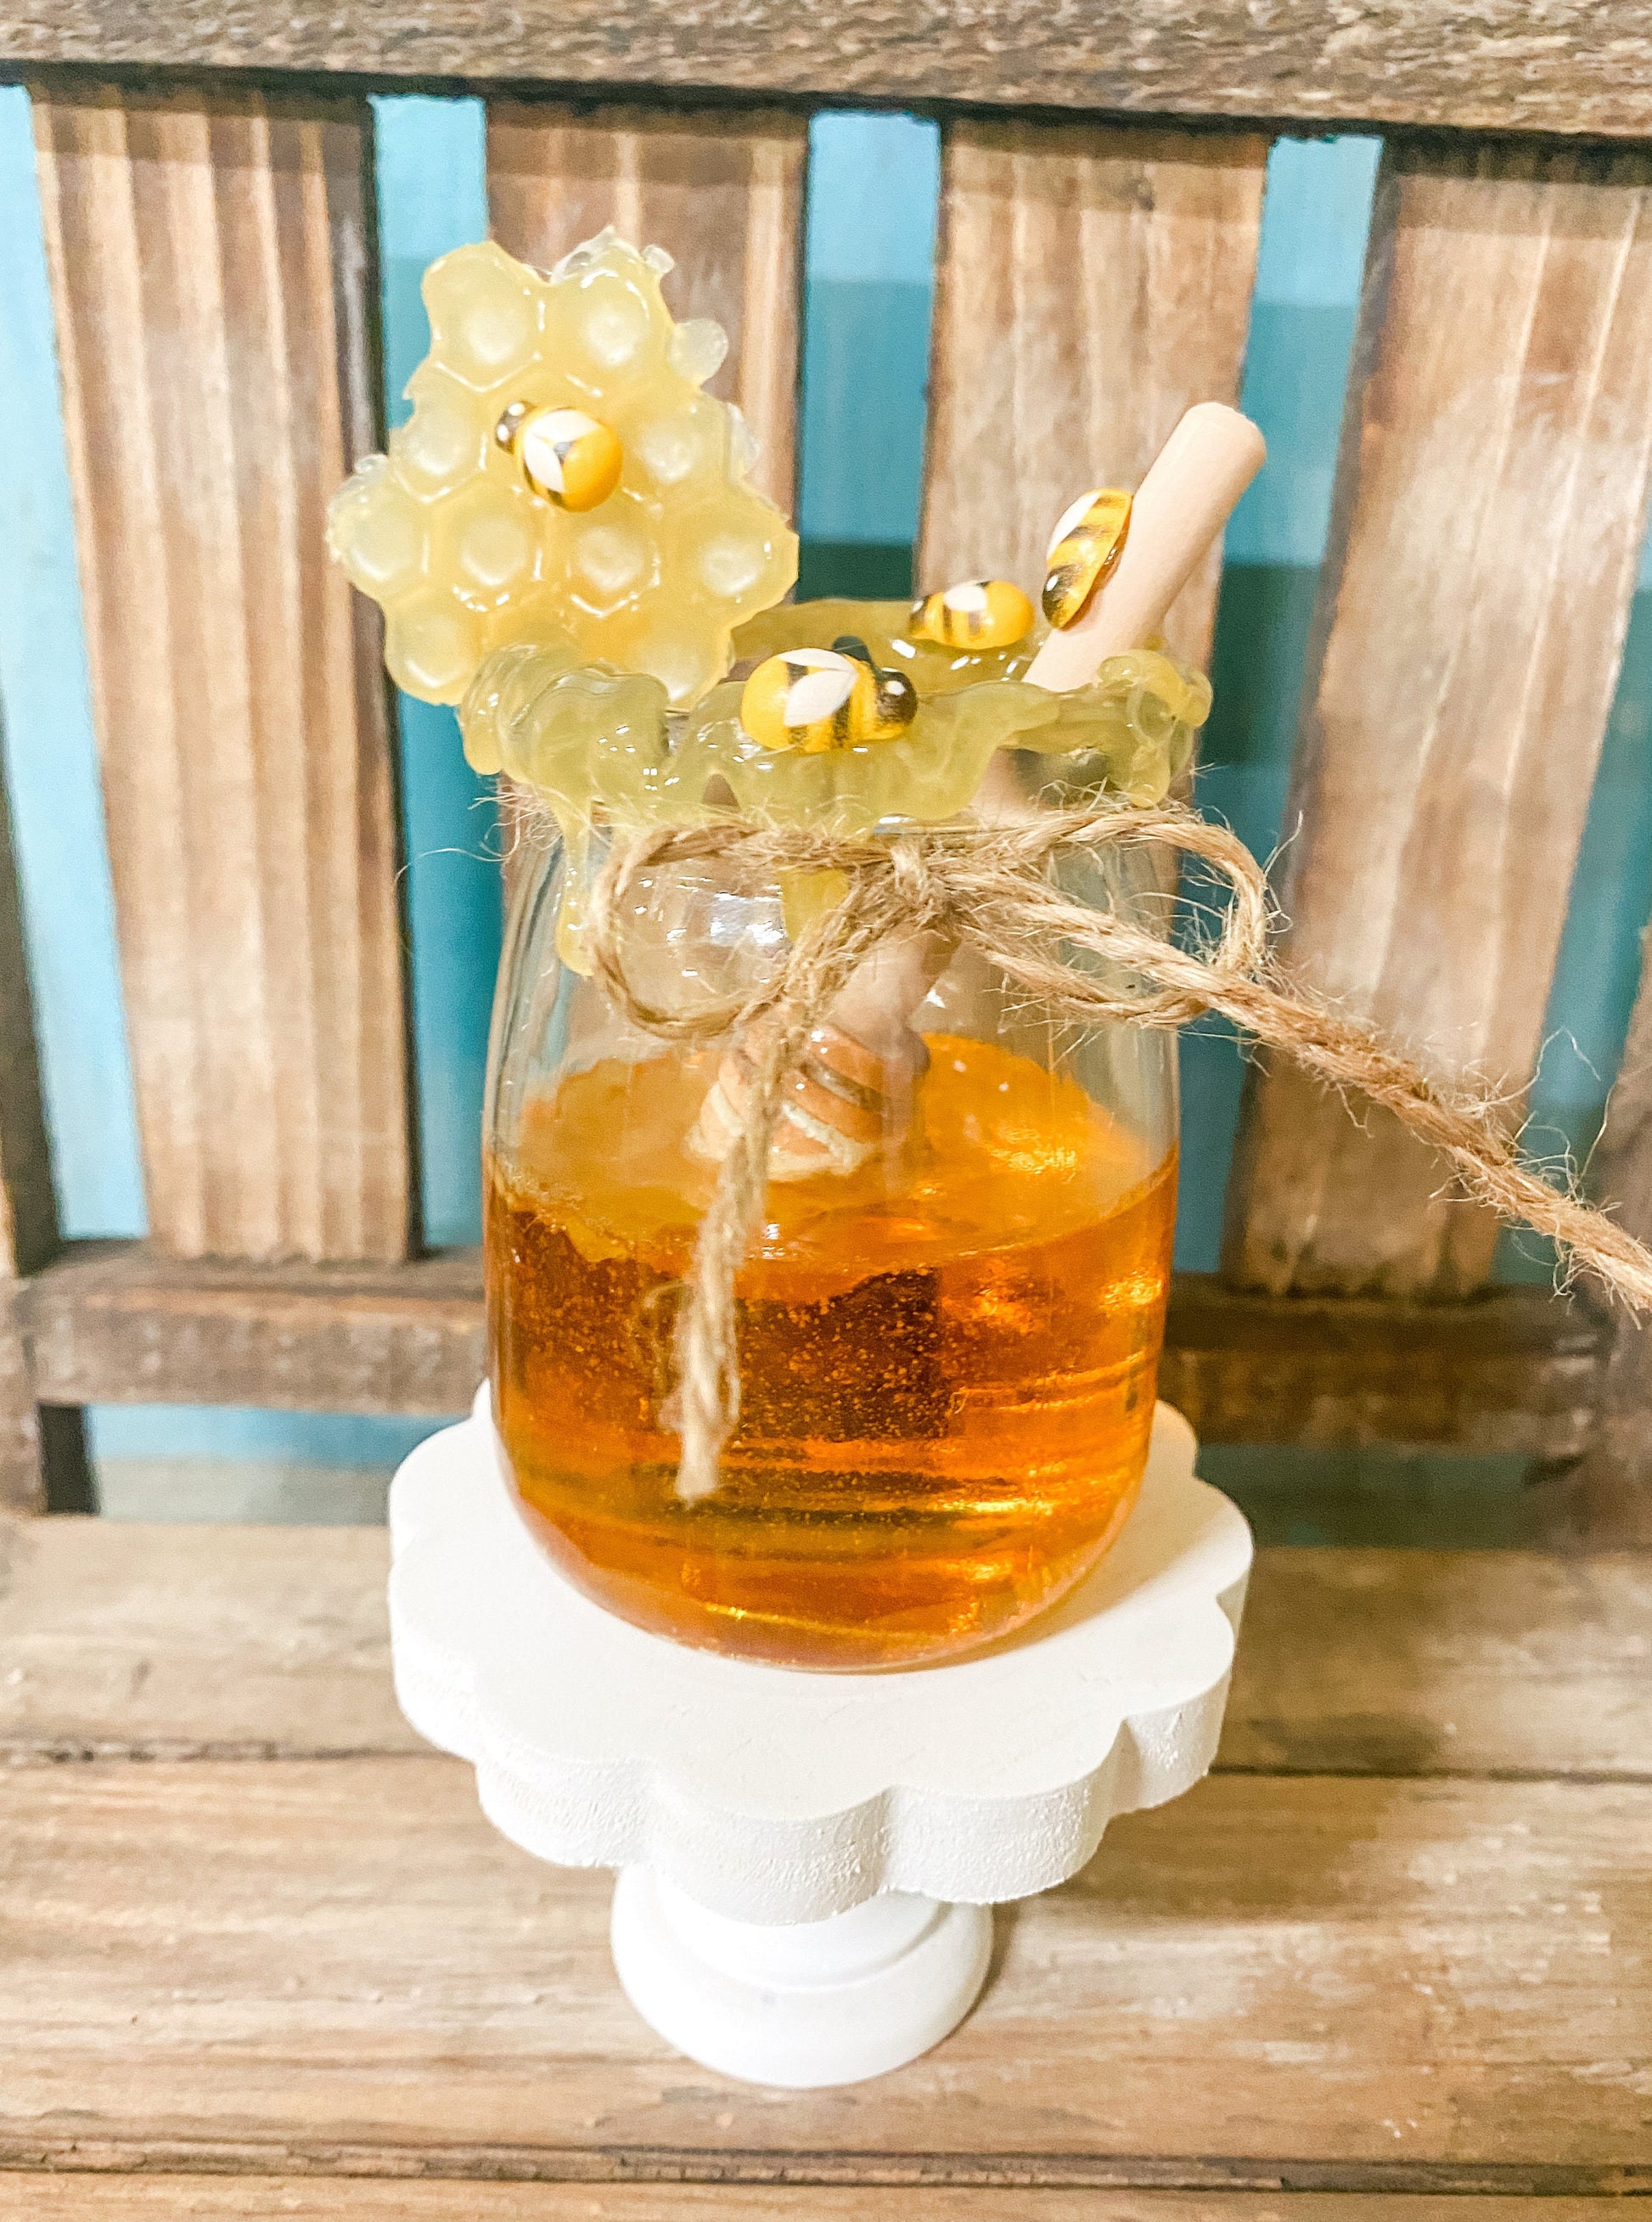  Bee Decorations, Spring Farmhouse Honey bee Tiered